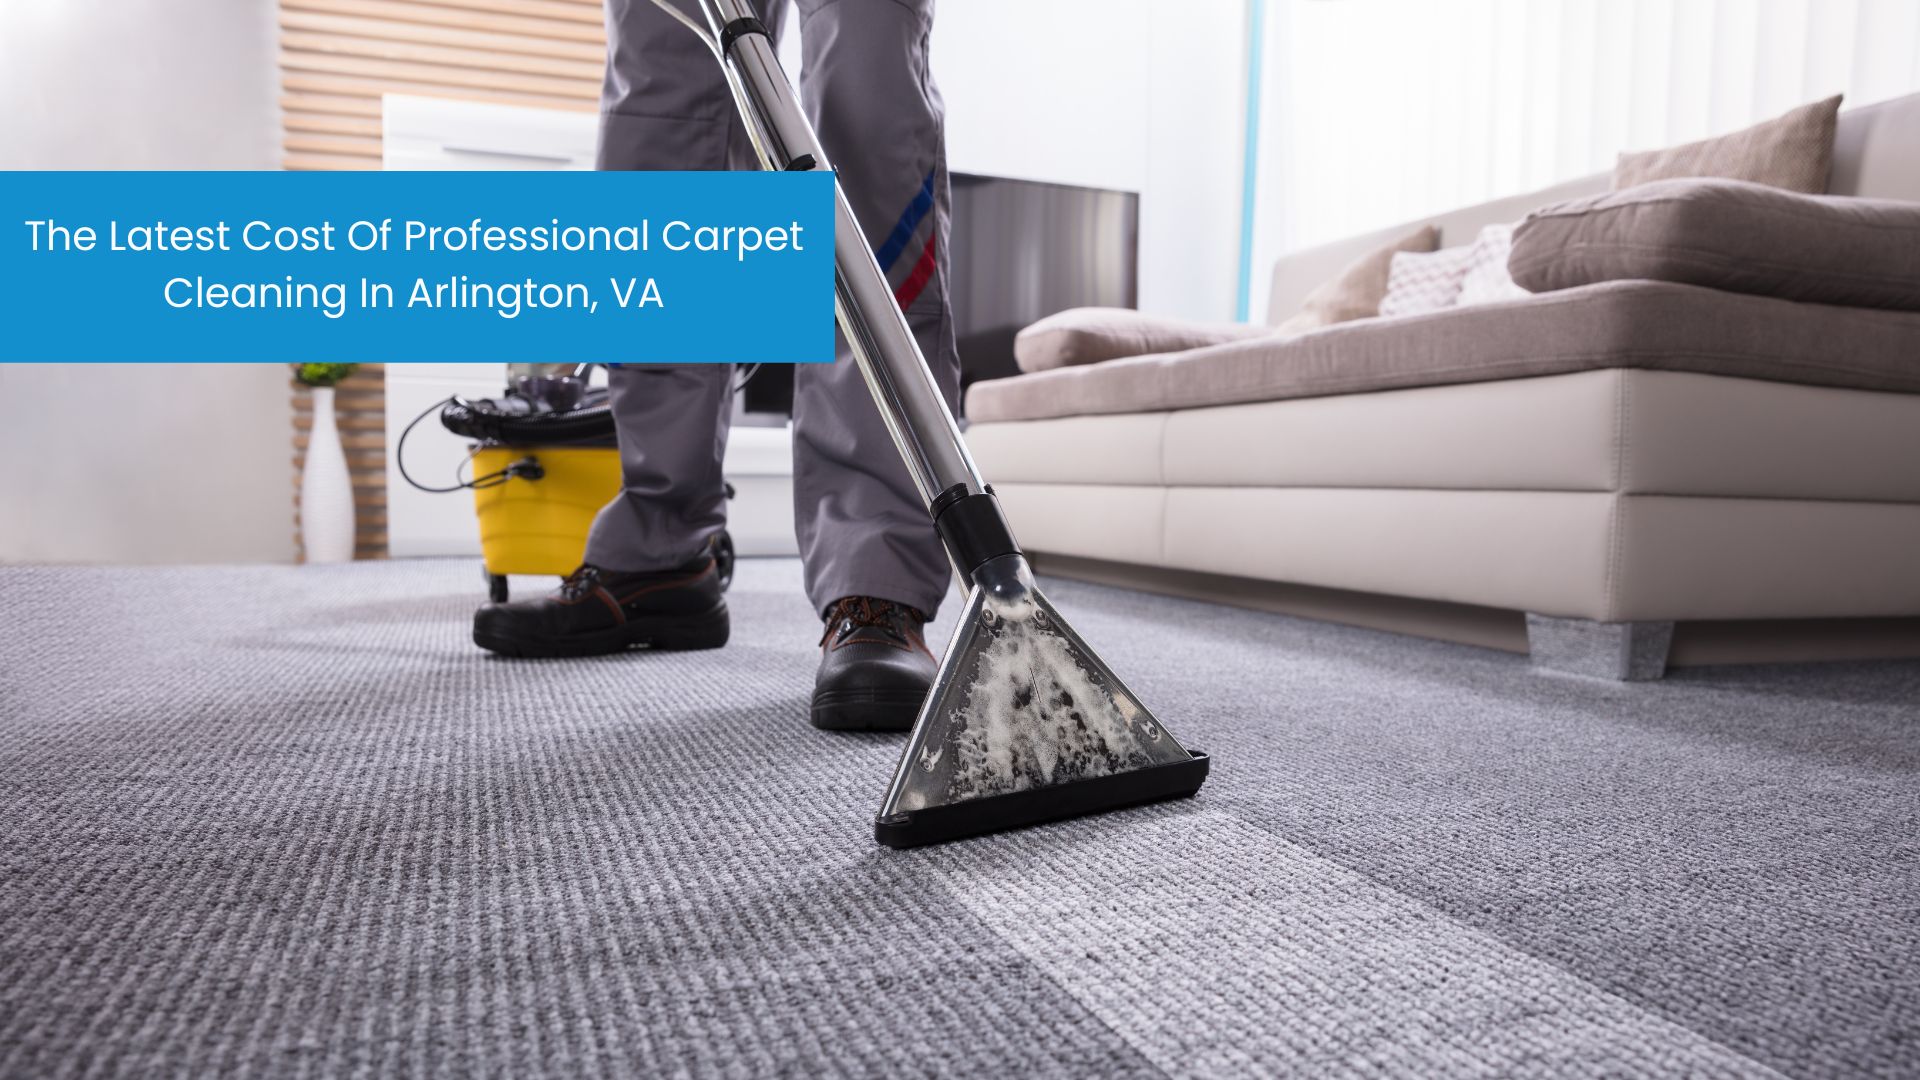 The Latest Cost of Professional Carpet Cleaning In Arlington, VA